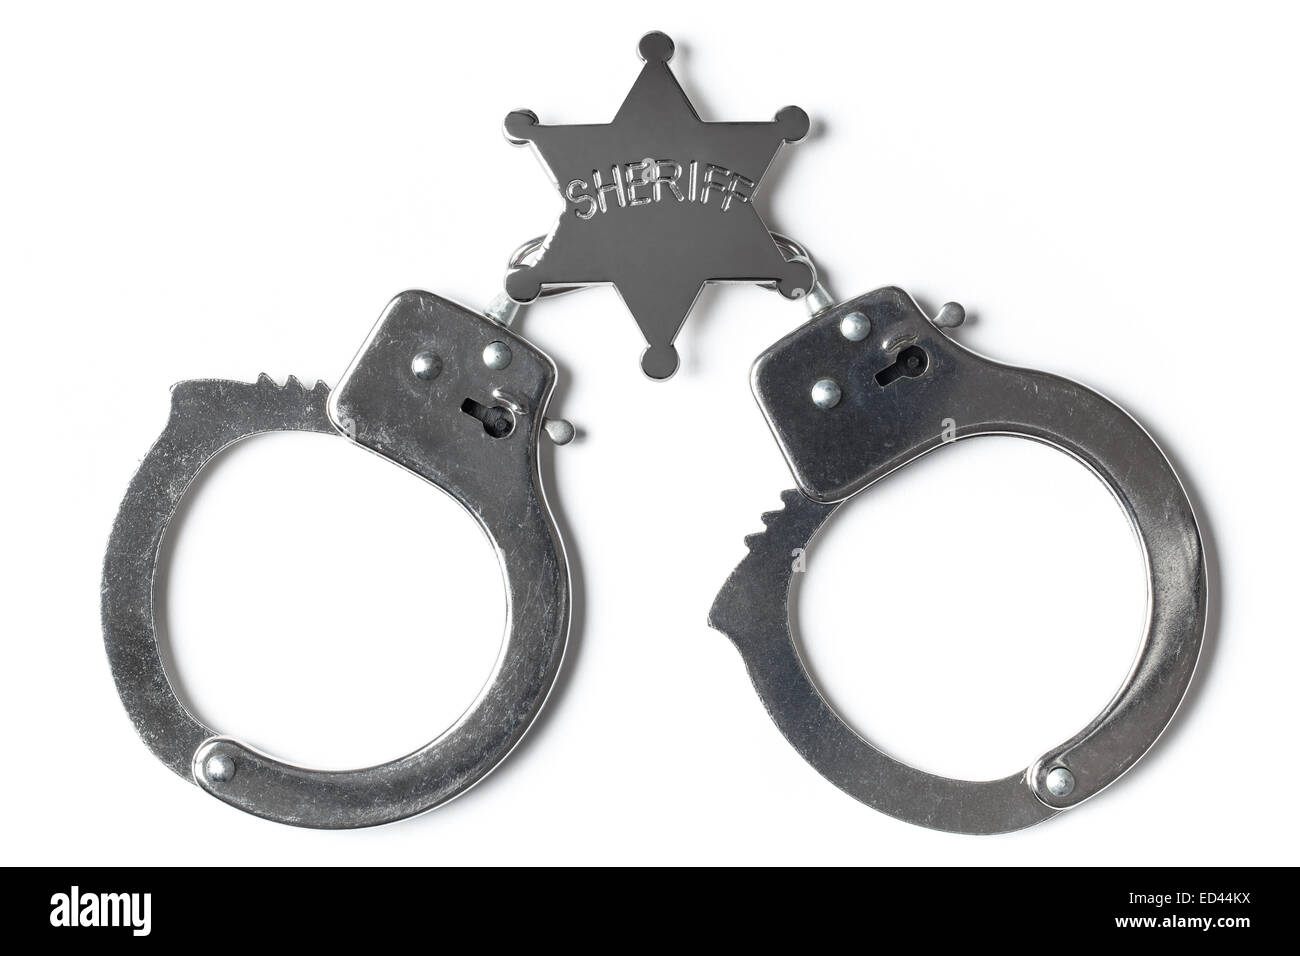 Sheriff's star and locked handcuffs isolated on white background Stock Photo